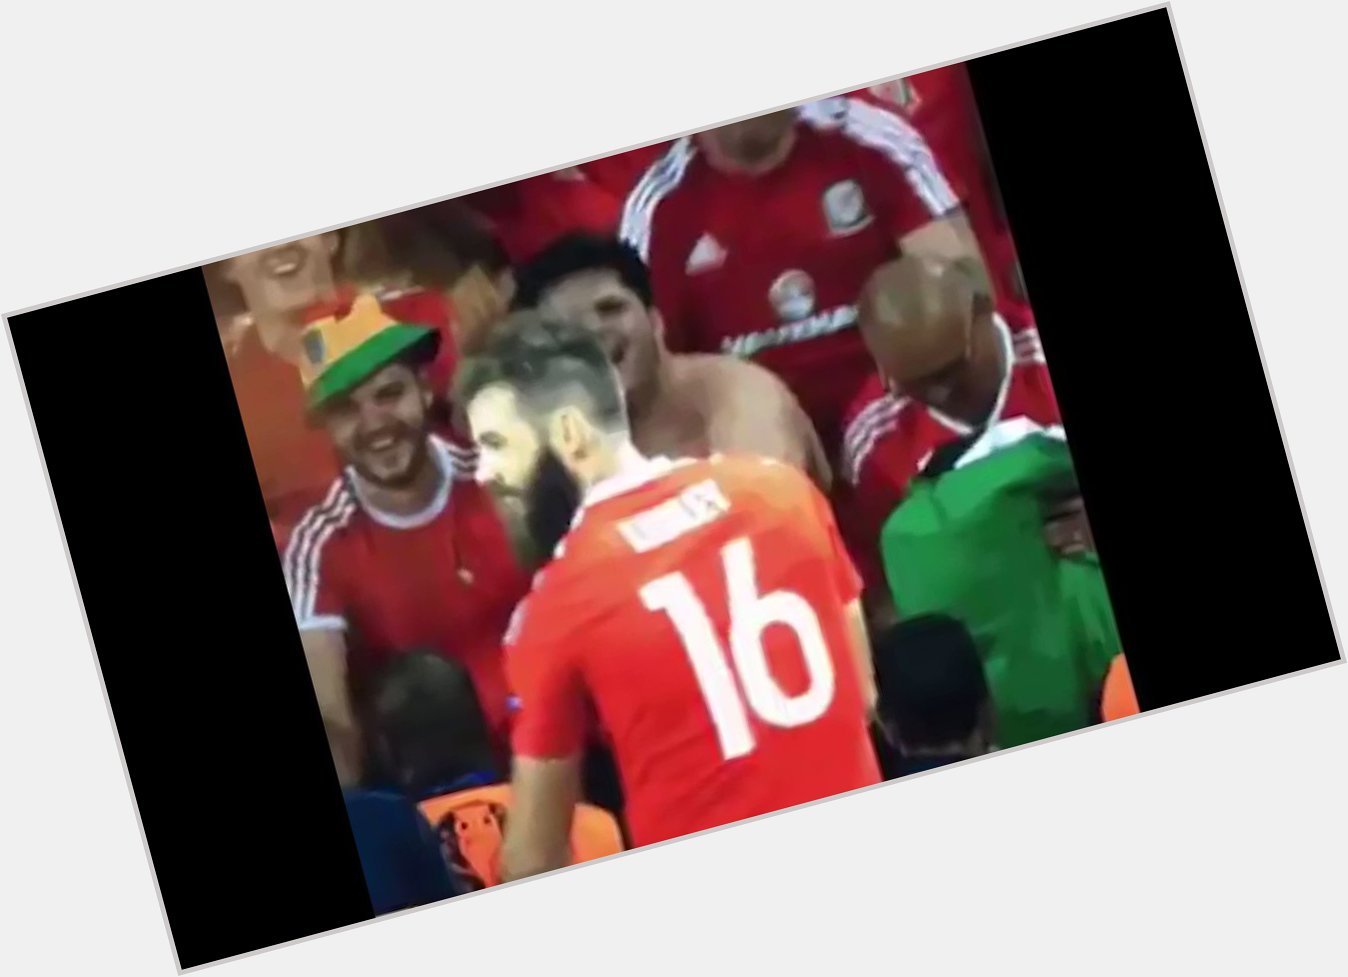  HAPPY BIRTHDAY Joe Ledley turns 32 today. 

Here\s a compilation of some of his weirdest dances... 